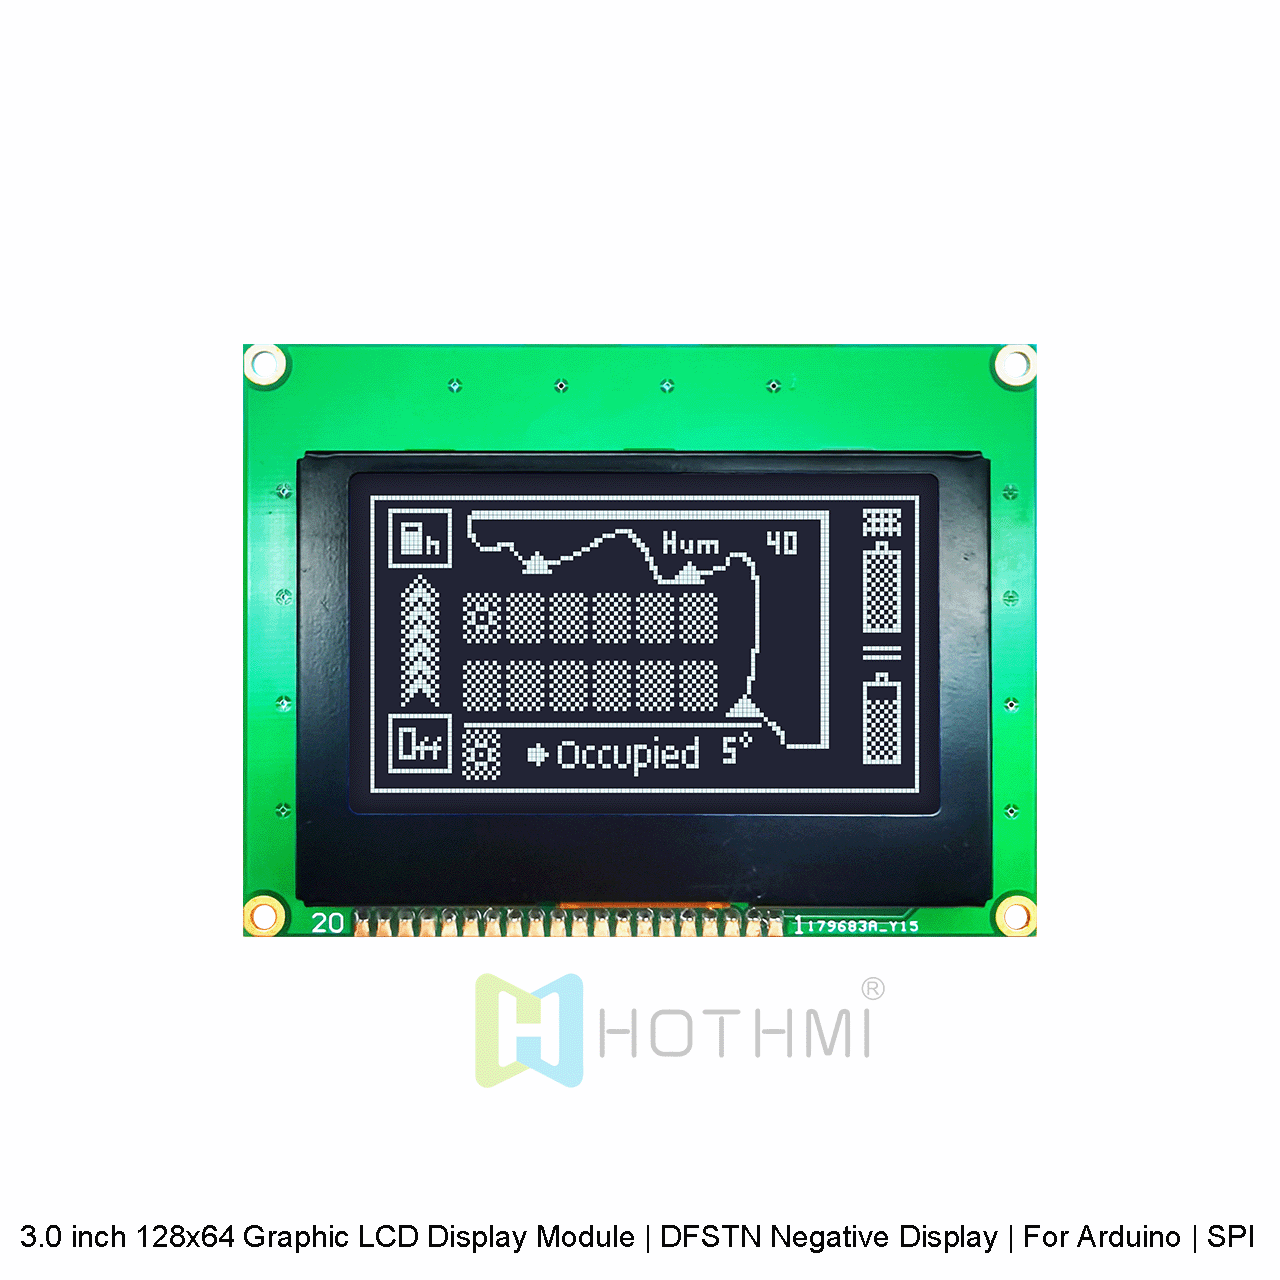 3.0 inch 128x64 Graphic LCD Display Module | DFSTN Negative Display | For Arduino | SPI Interface | Black Background White Graphic LCD